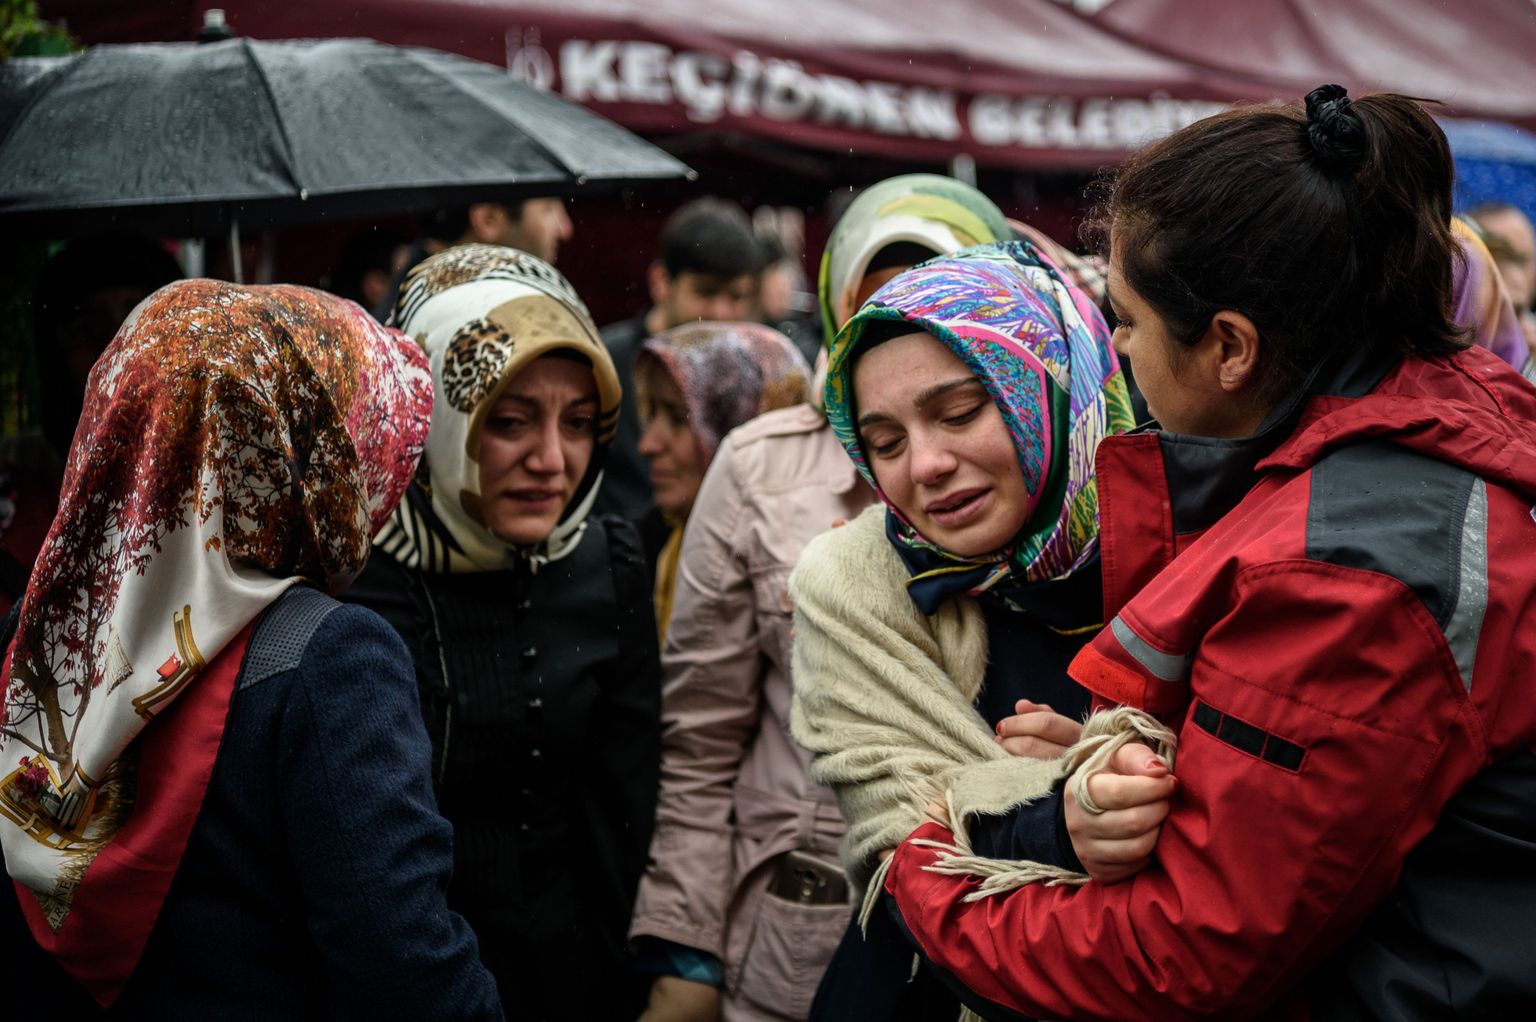 TOPSHOT - Relatives of a victim cry as they wait for the body on March 14, 2016 at the forensic building in Ankara the day after a suicide car bomb ripped through a busy square in central Ankara killing 37 people and wounding 125, officials said. 
No one has claimed the attack, the latest in a spate of deadly attacks to hit Turkey. Turkish warplanes on March 14 struck the outlawed Kurdistan Workers' Party (PKK) in the mountainous Kandil and Gara regions in northern Iraq, the army said. / AFP PHOTO / OZAN KOSE